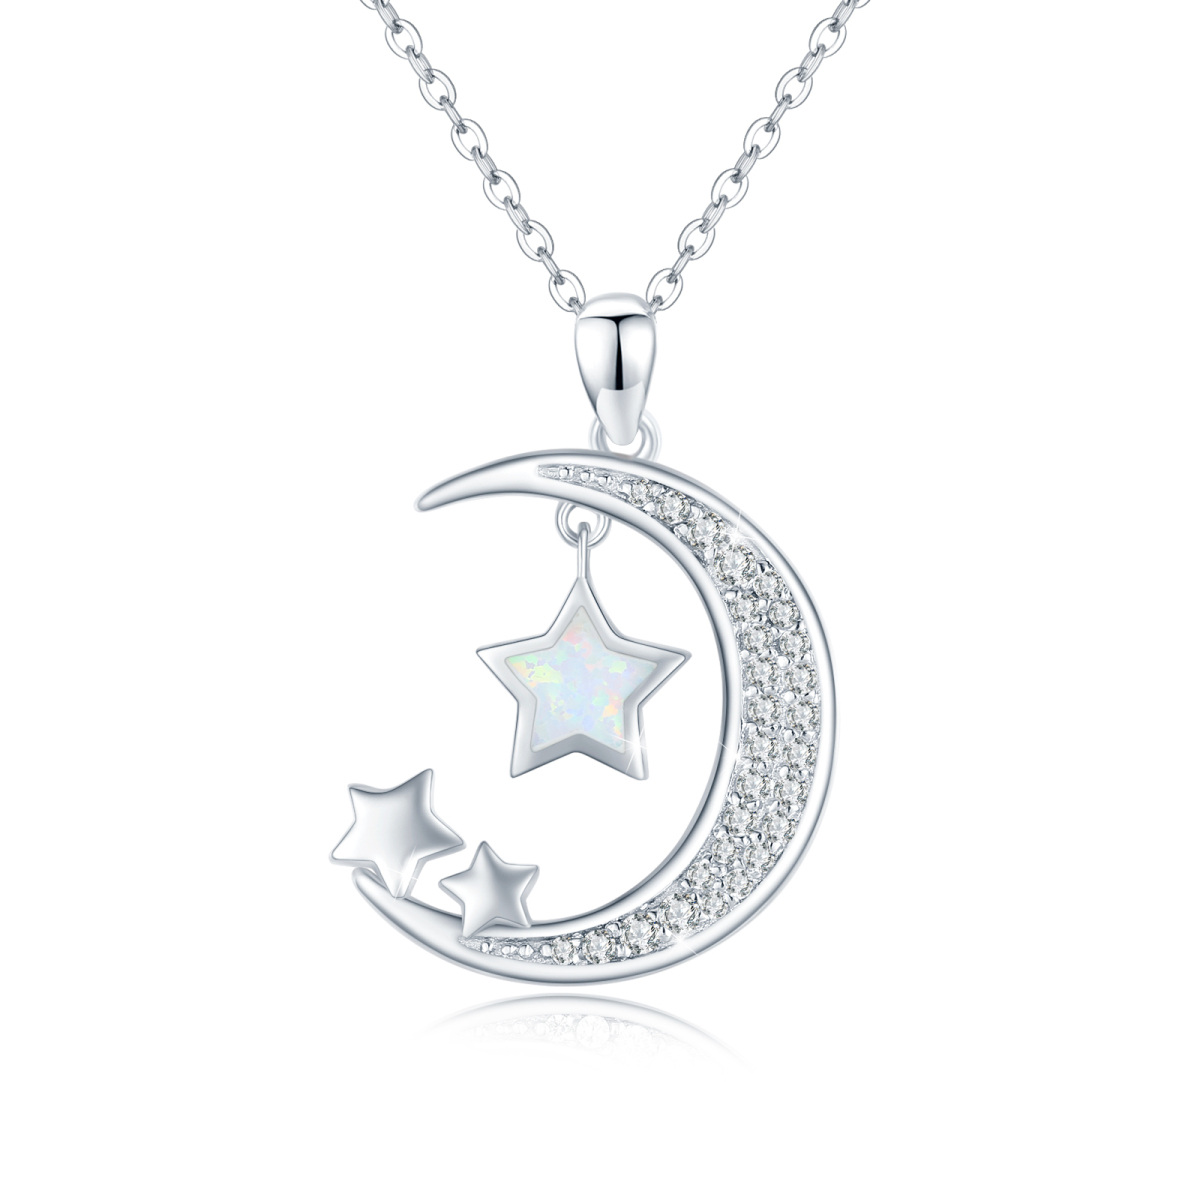 Sterling Silver Five-Pointed Star Shaped Opal Moon & Star Pendant Necklace-1